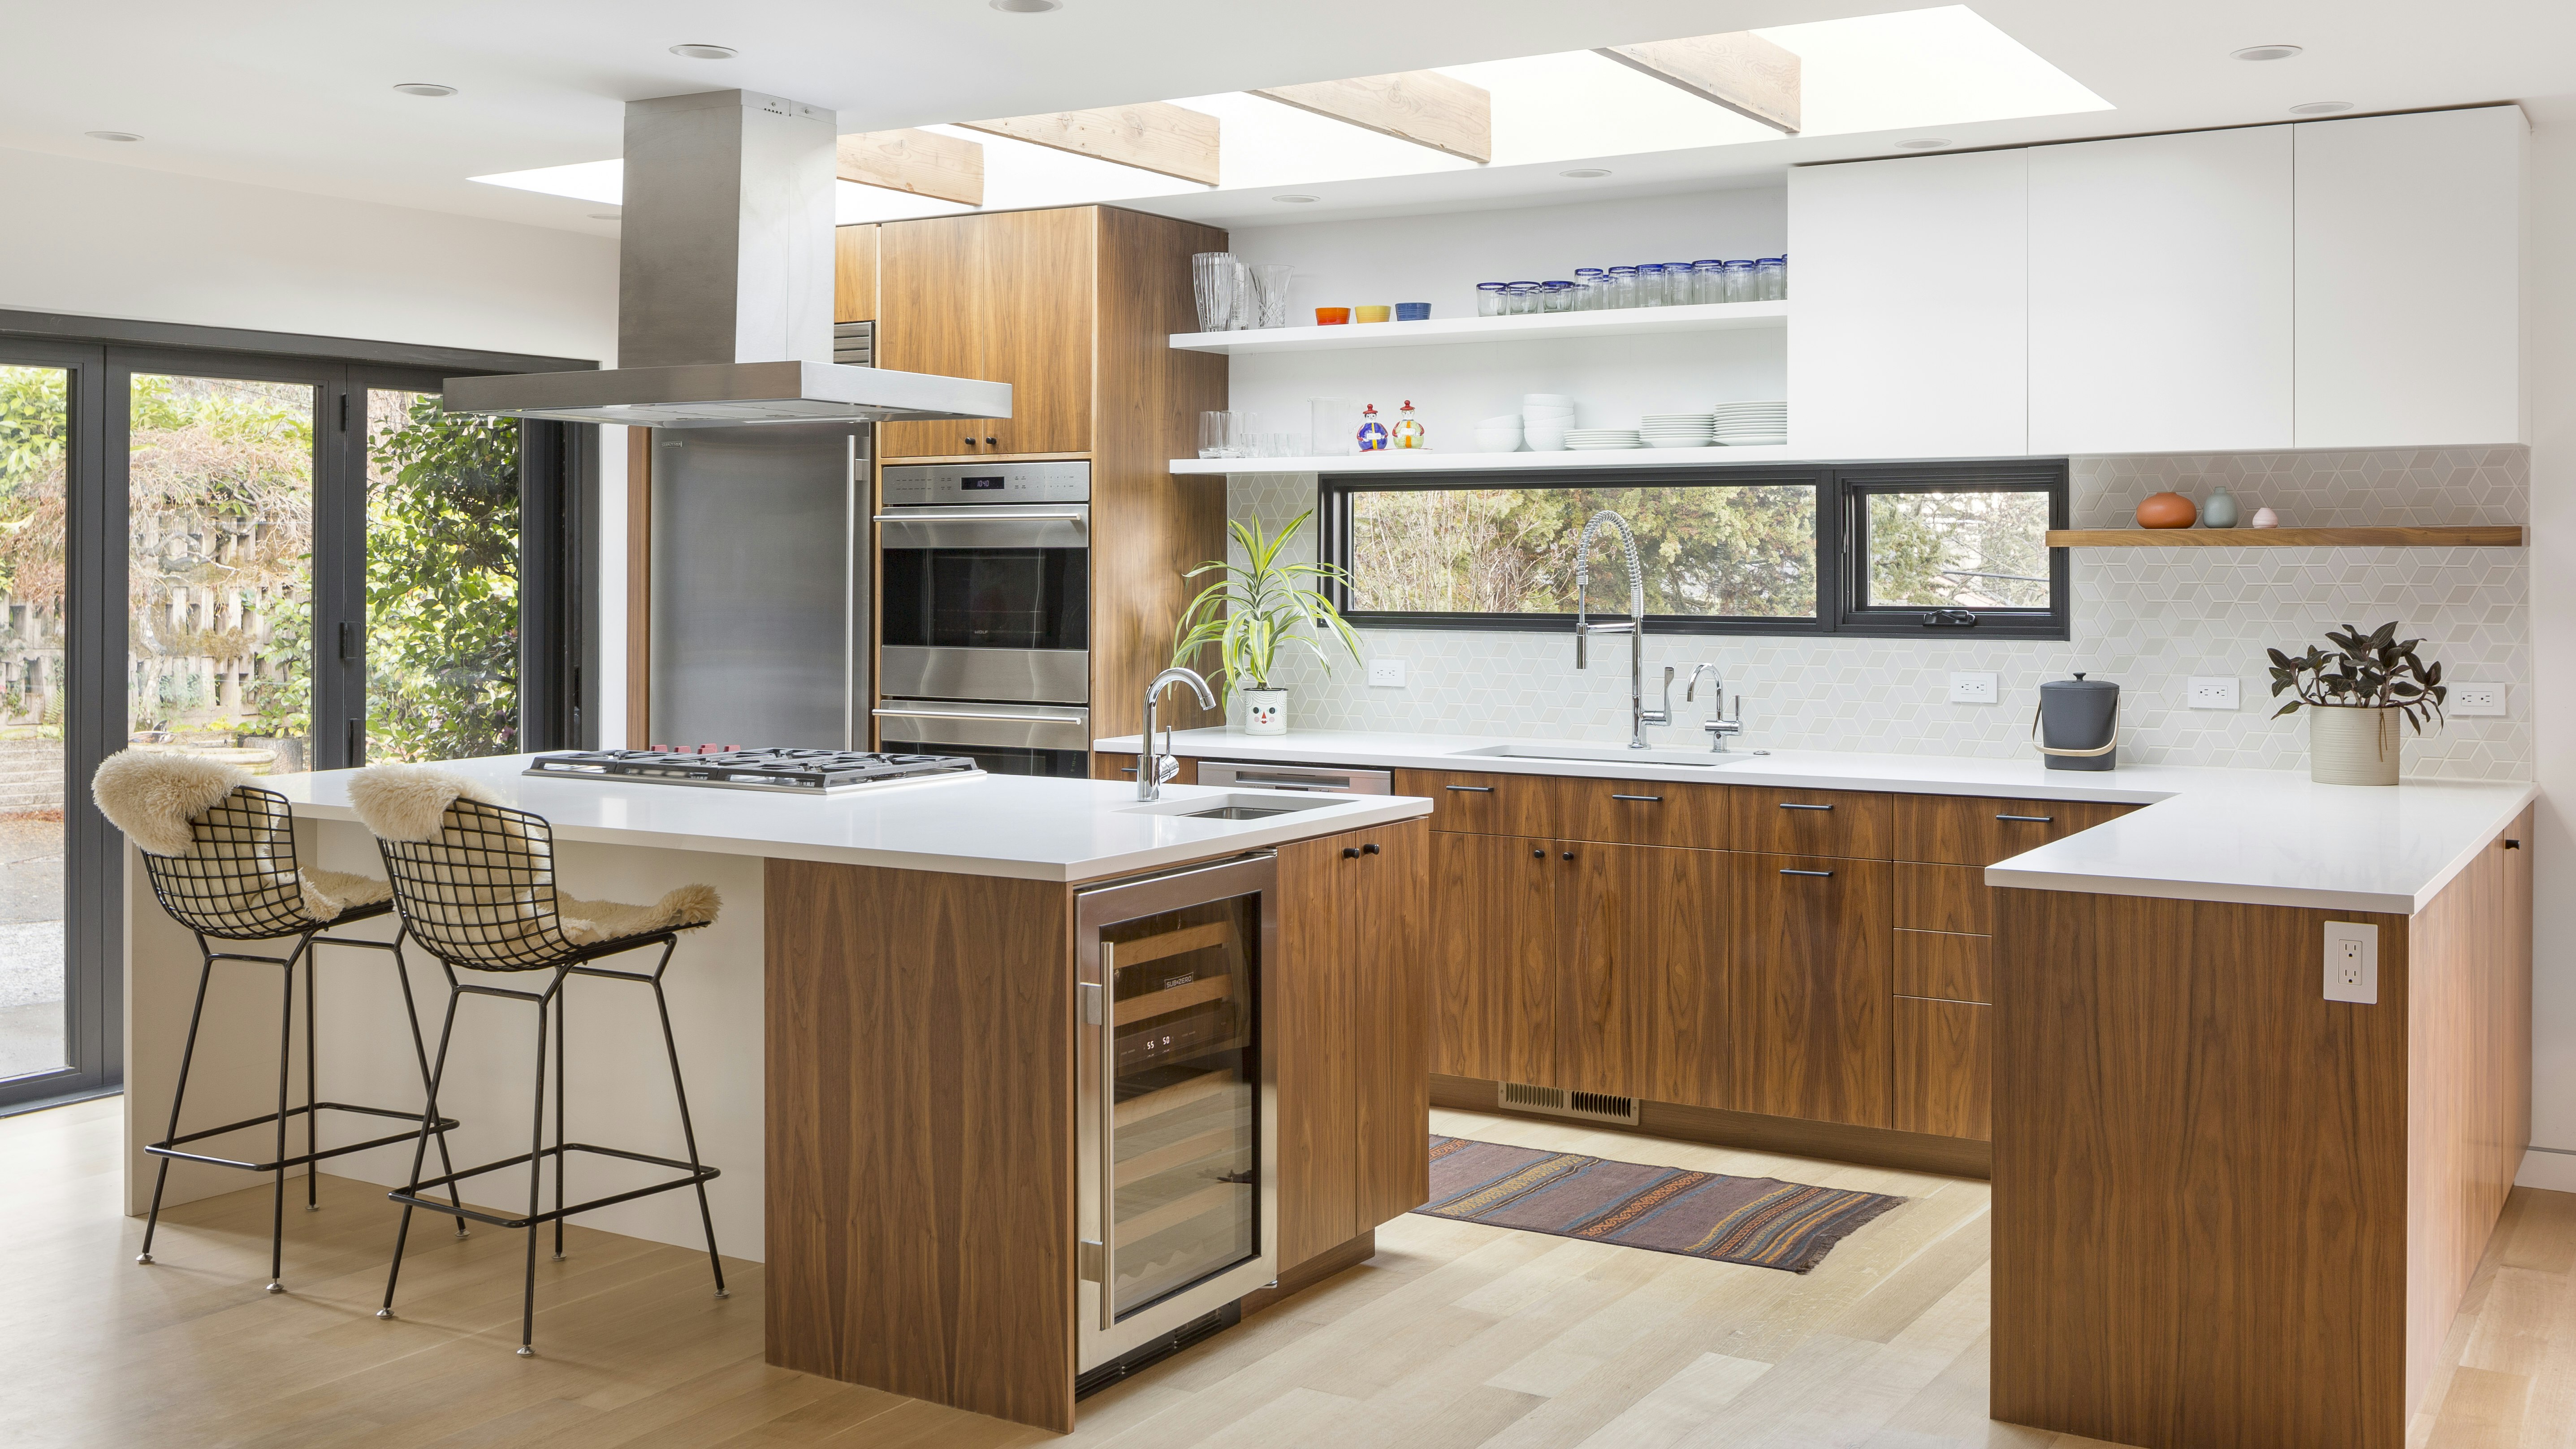 Contemporary kitchen ideas to refresh your home